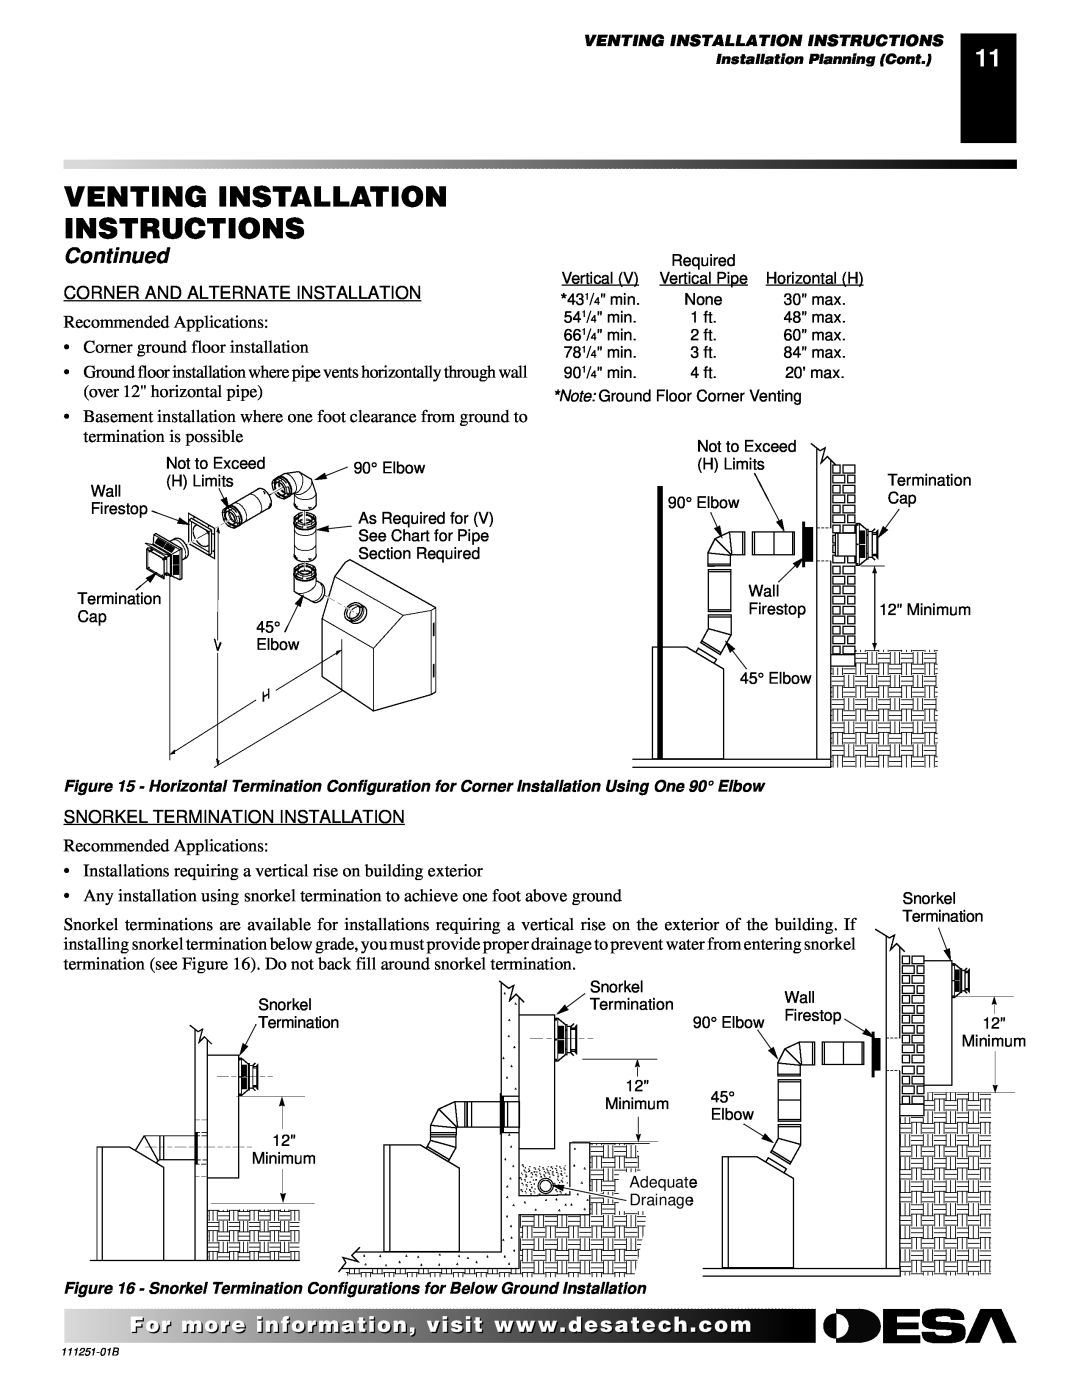 Desa (V)T36ENA installation manual Venting Installation Instructions, Continued, Recommended Applications 